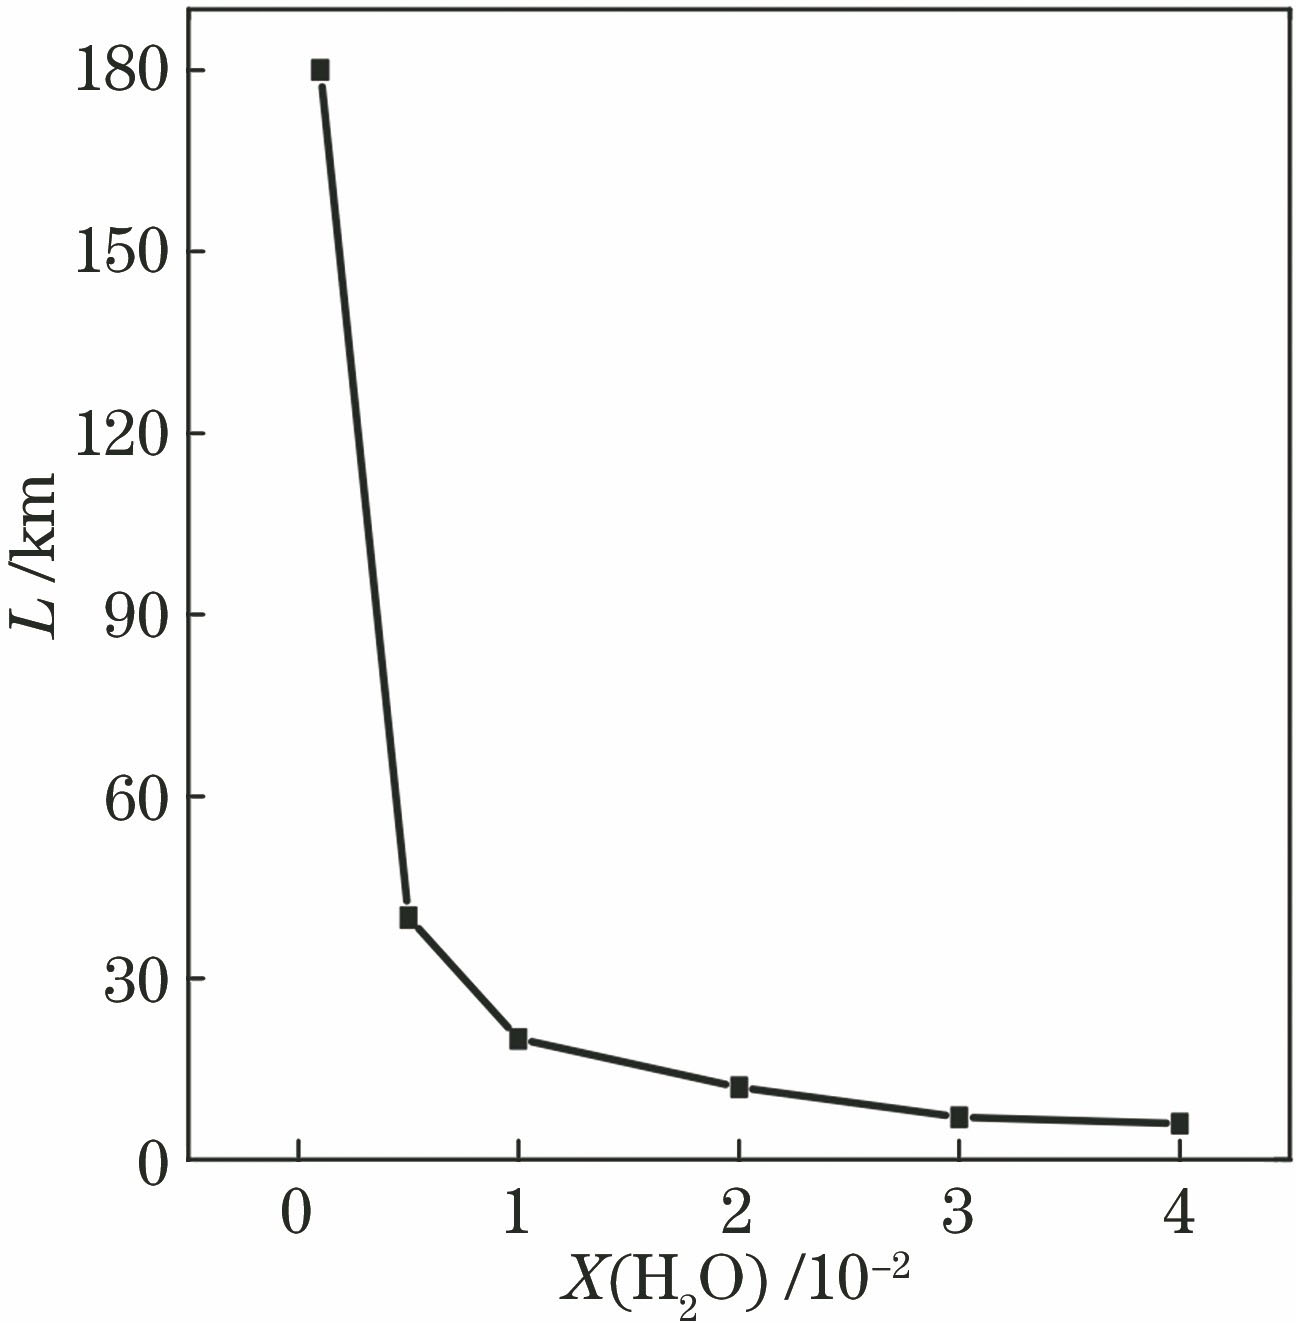 Relationship curve between X(H2O) and L with water vaporr eaching saturated absorption, T=296 K and P=101.325 kPa